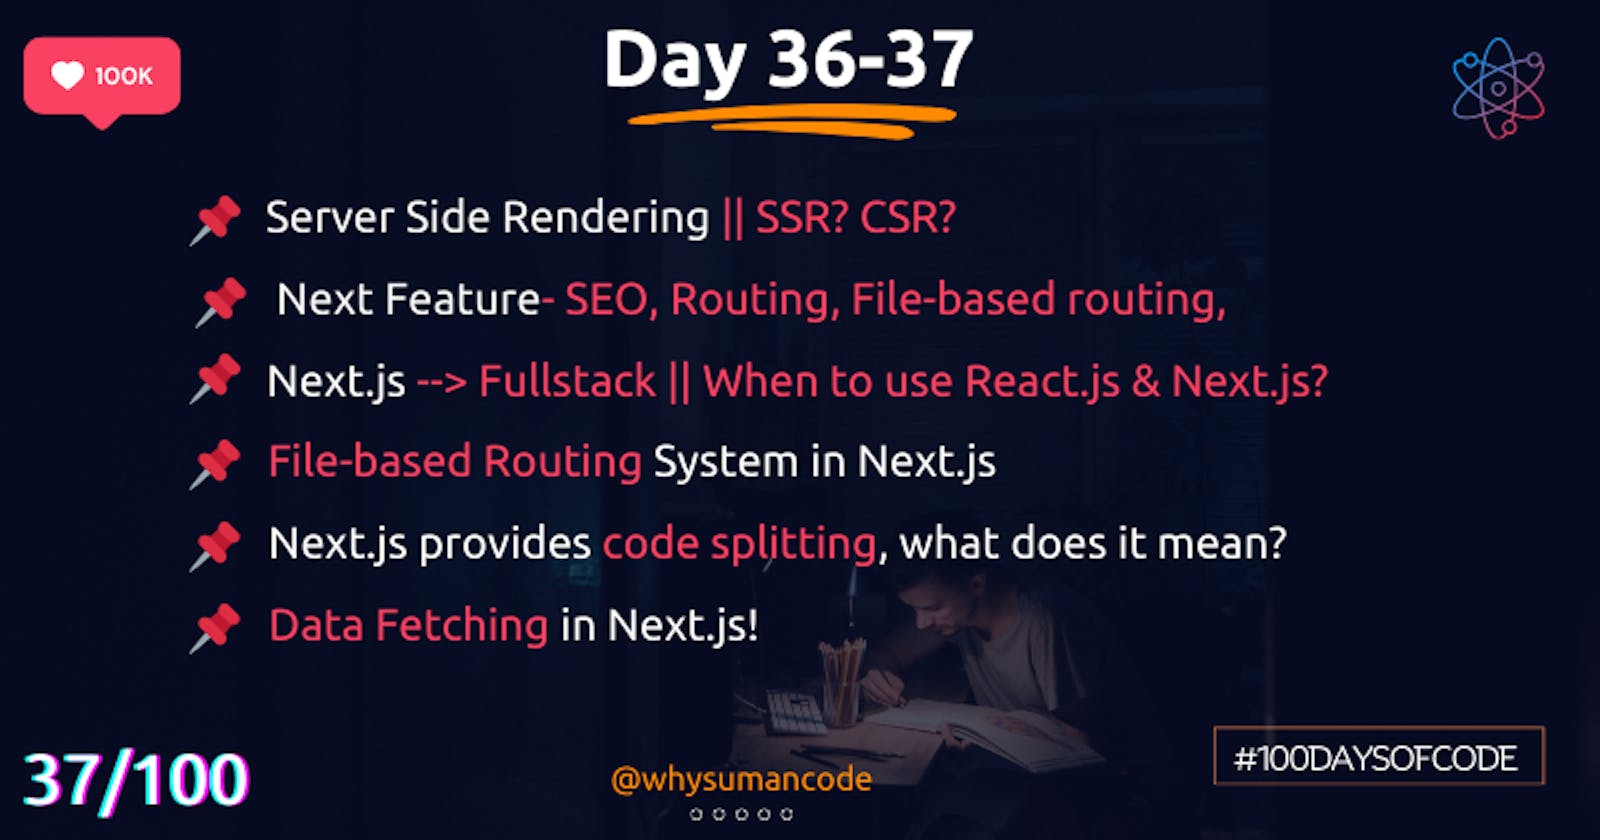 Server Side Rendering | SSR? CSR? Next Feature- SEO, Routing, File-based routing, Fullstack